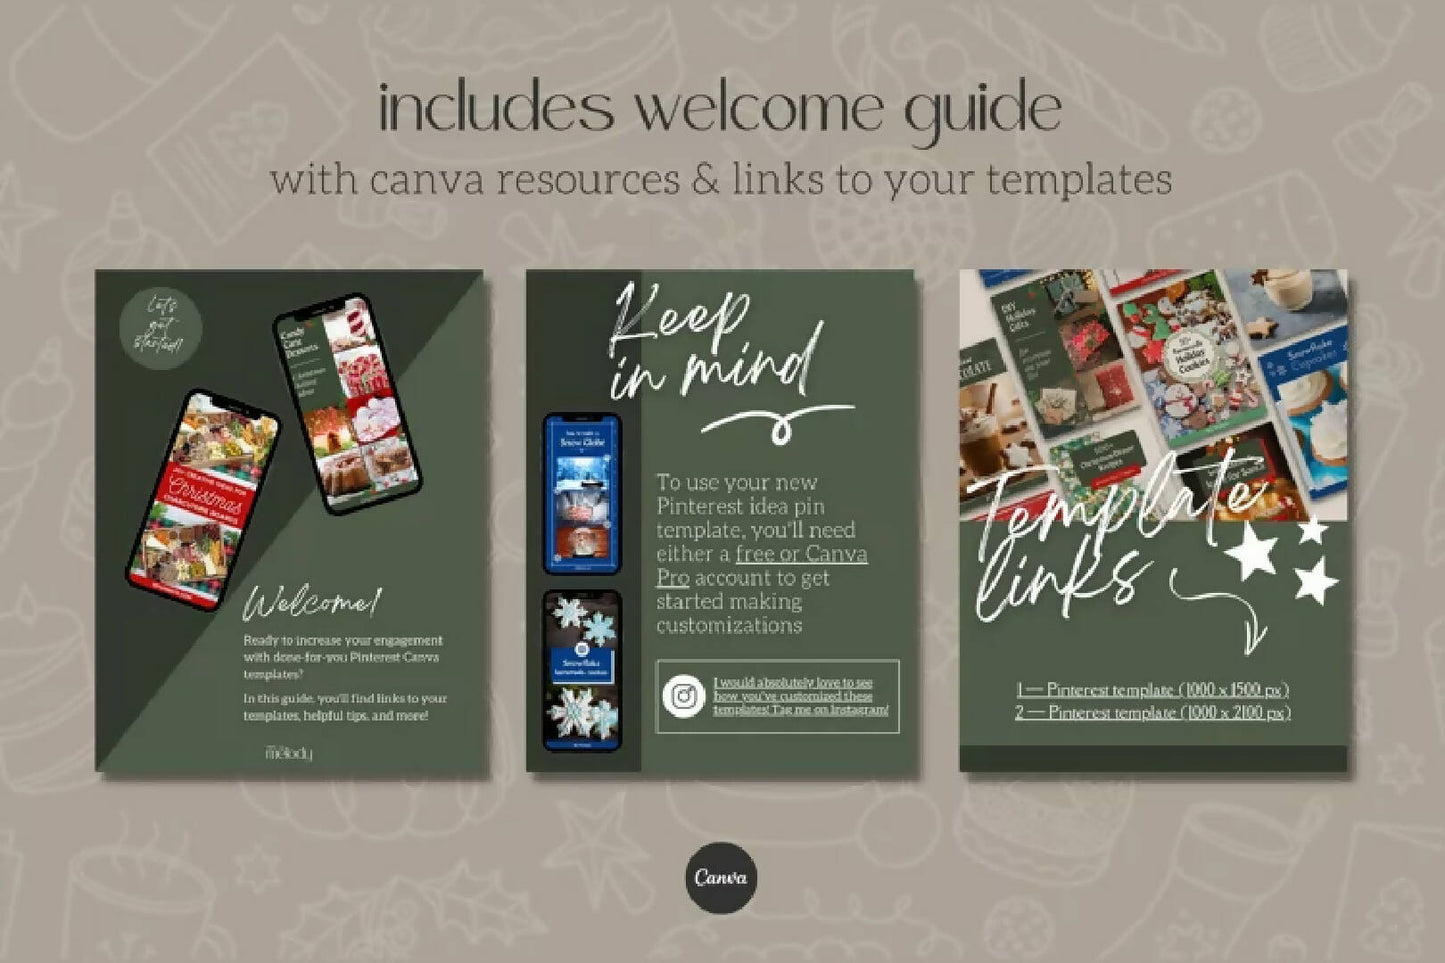 Christmas Canva Pinterest Templates for Bloggers